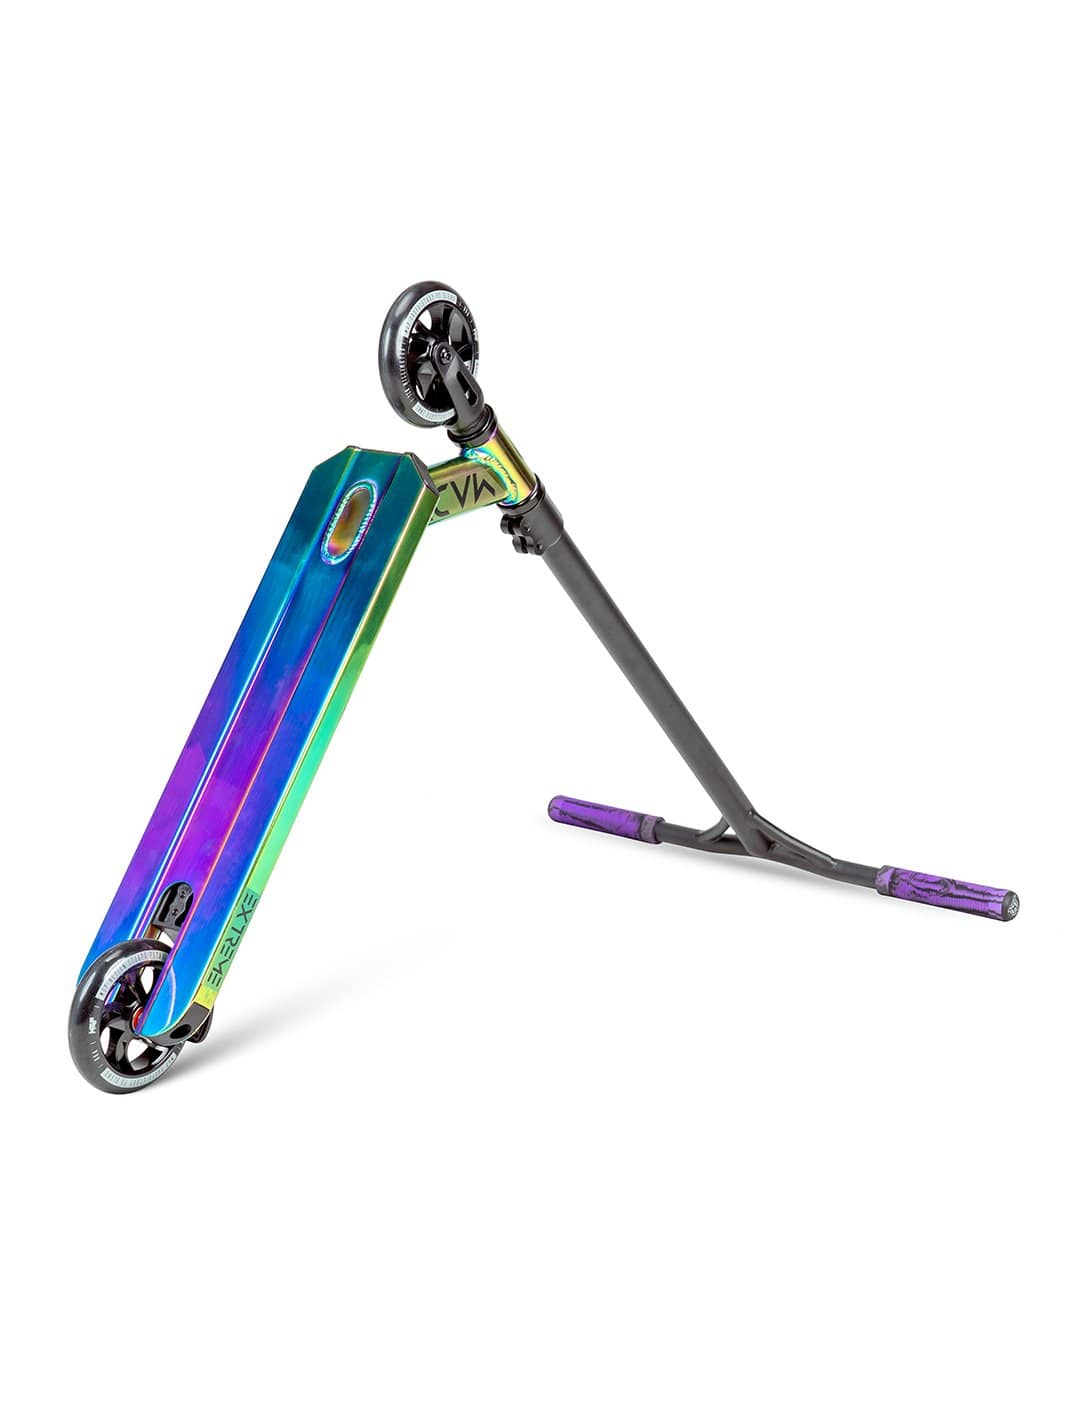 Madd Gear MGP Renegade Extreme Stunt Complete scooter Neochrome Oil Slick Light Park